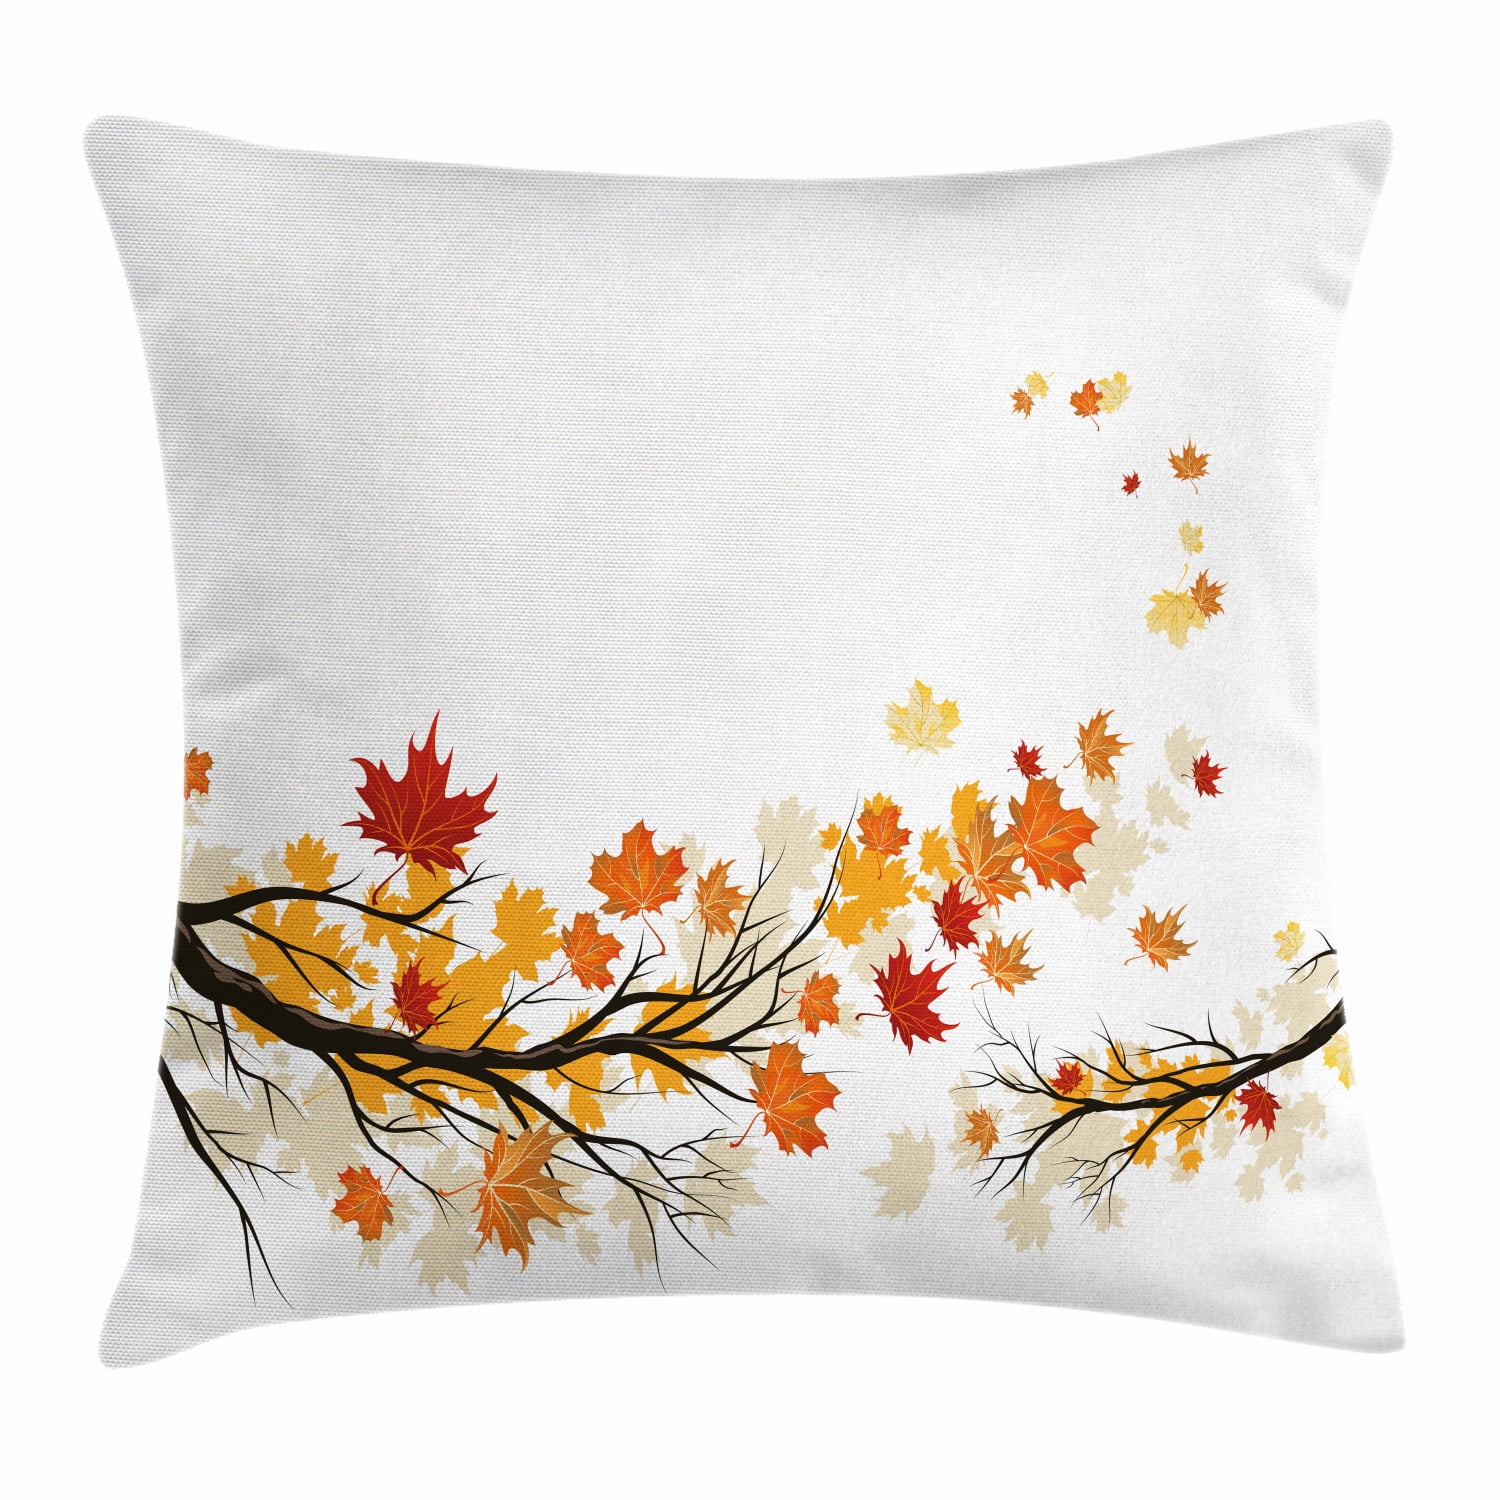 Fall Decorations Throw Pillow Cushion Cover, Swirling Bended Fall